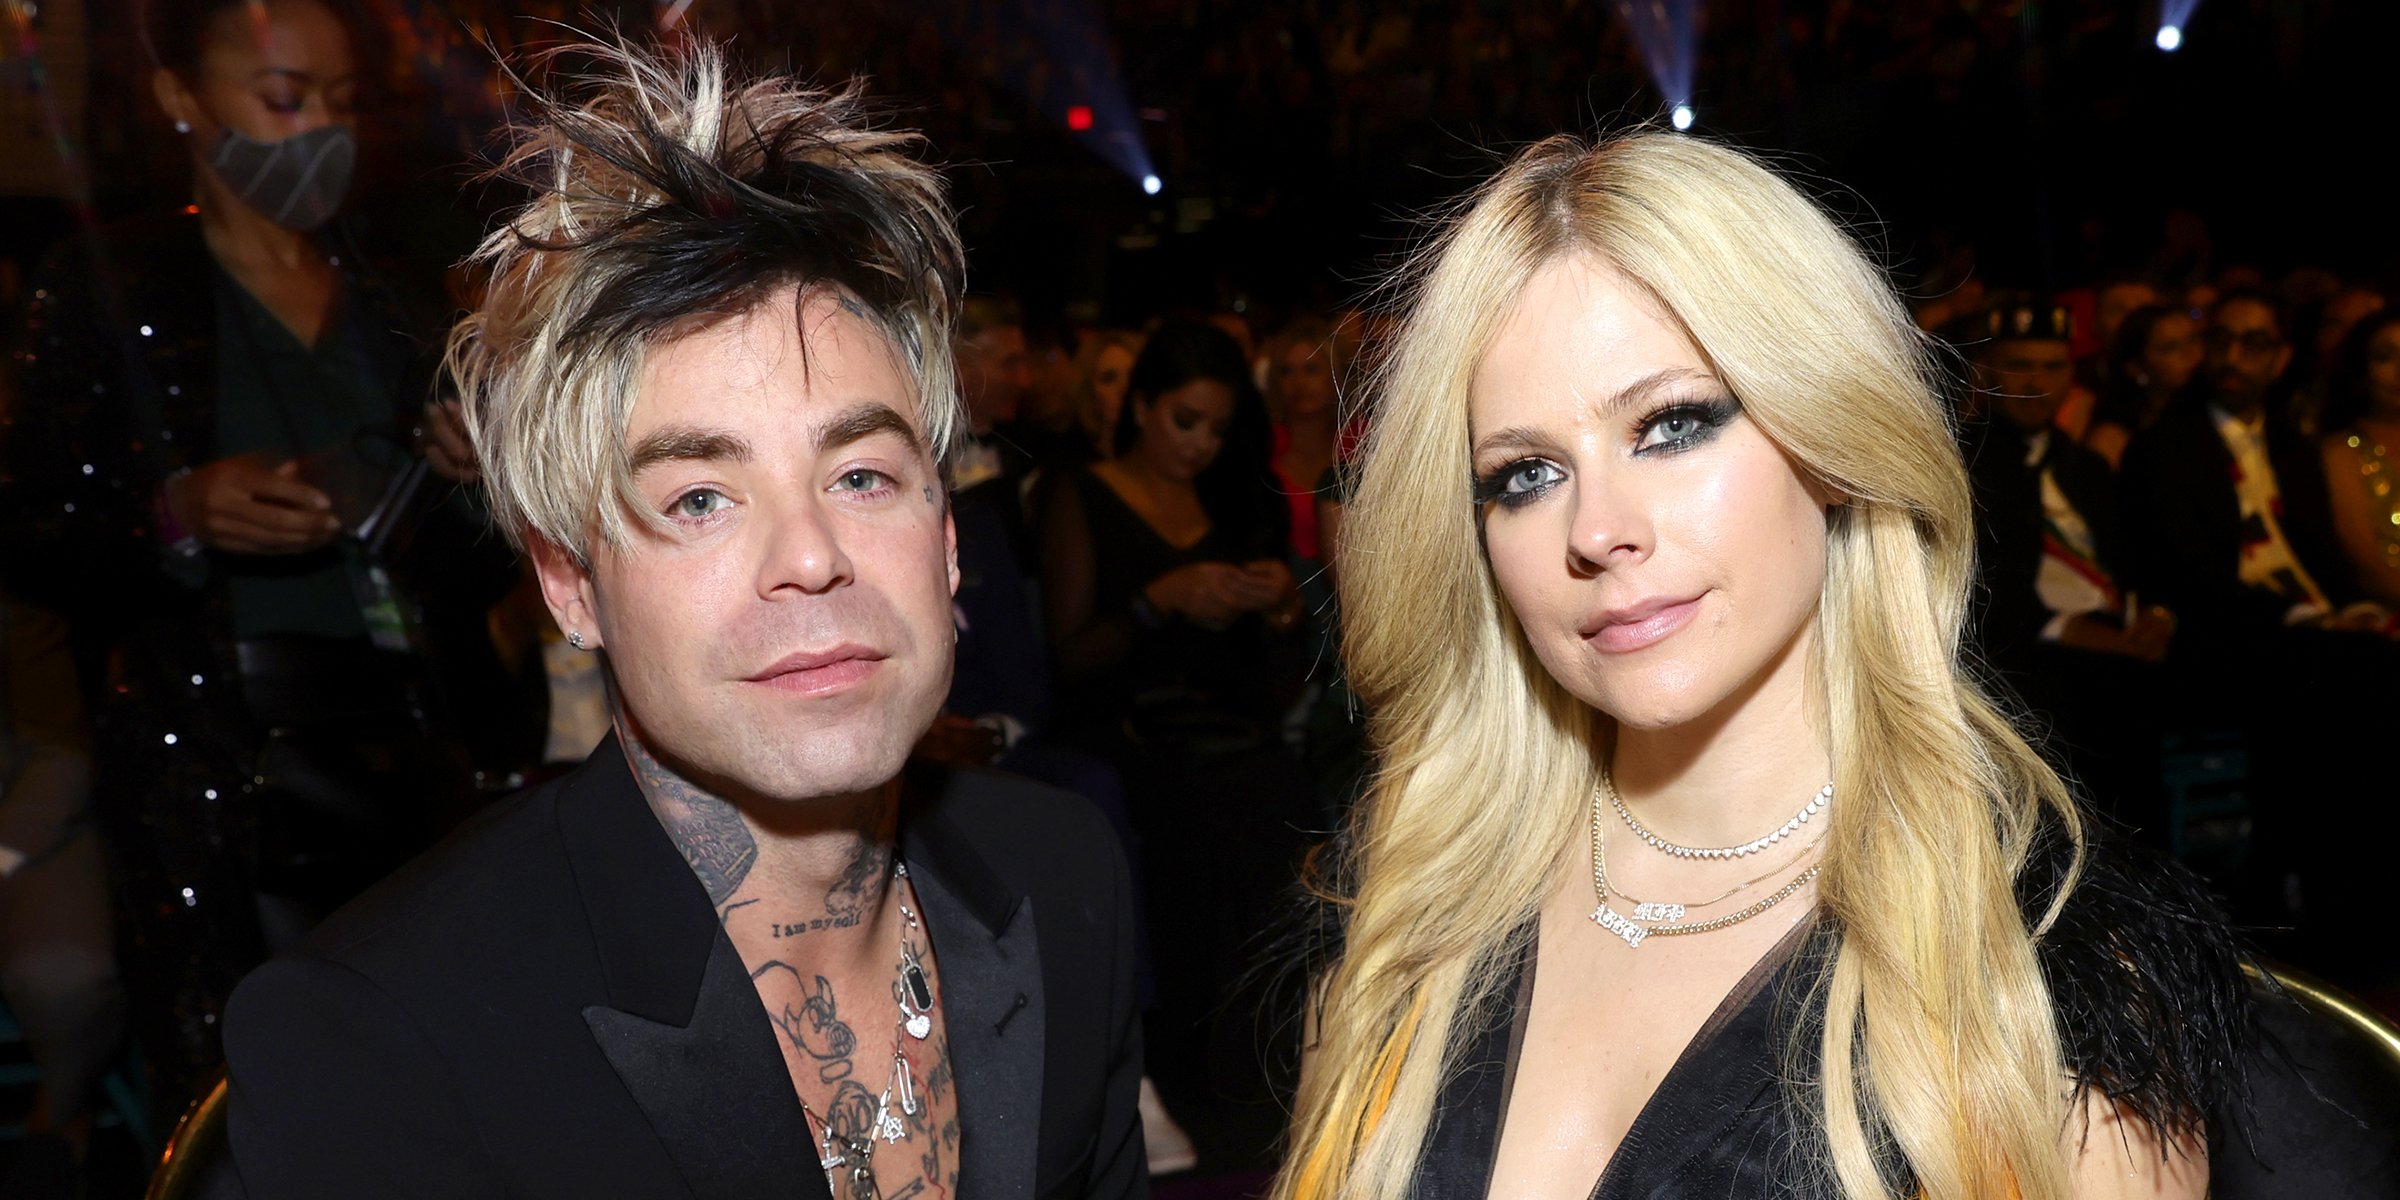 Mod Sun and Avril Lavigne, 2022 | Source: Getty Images